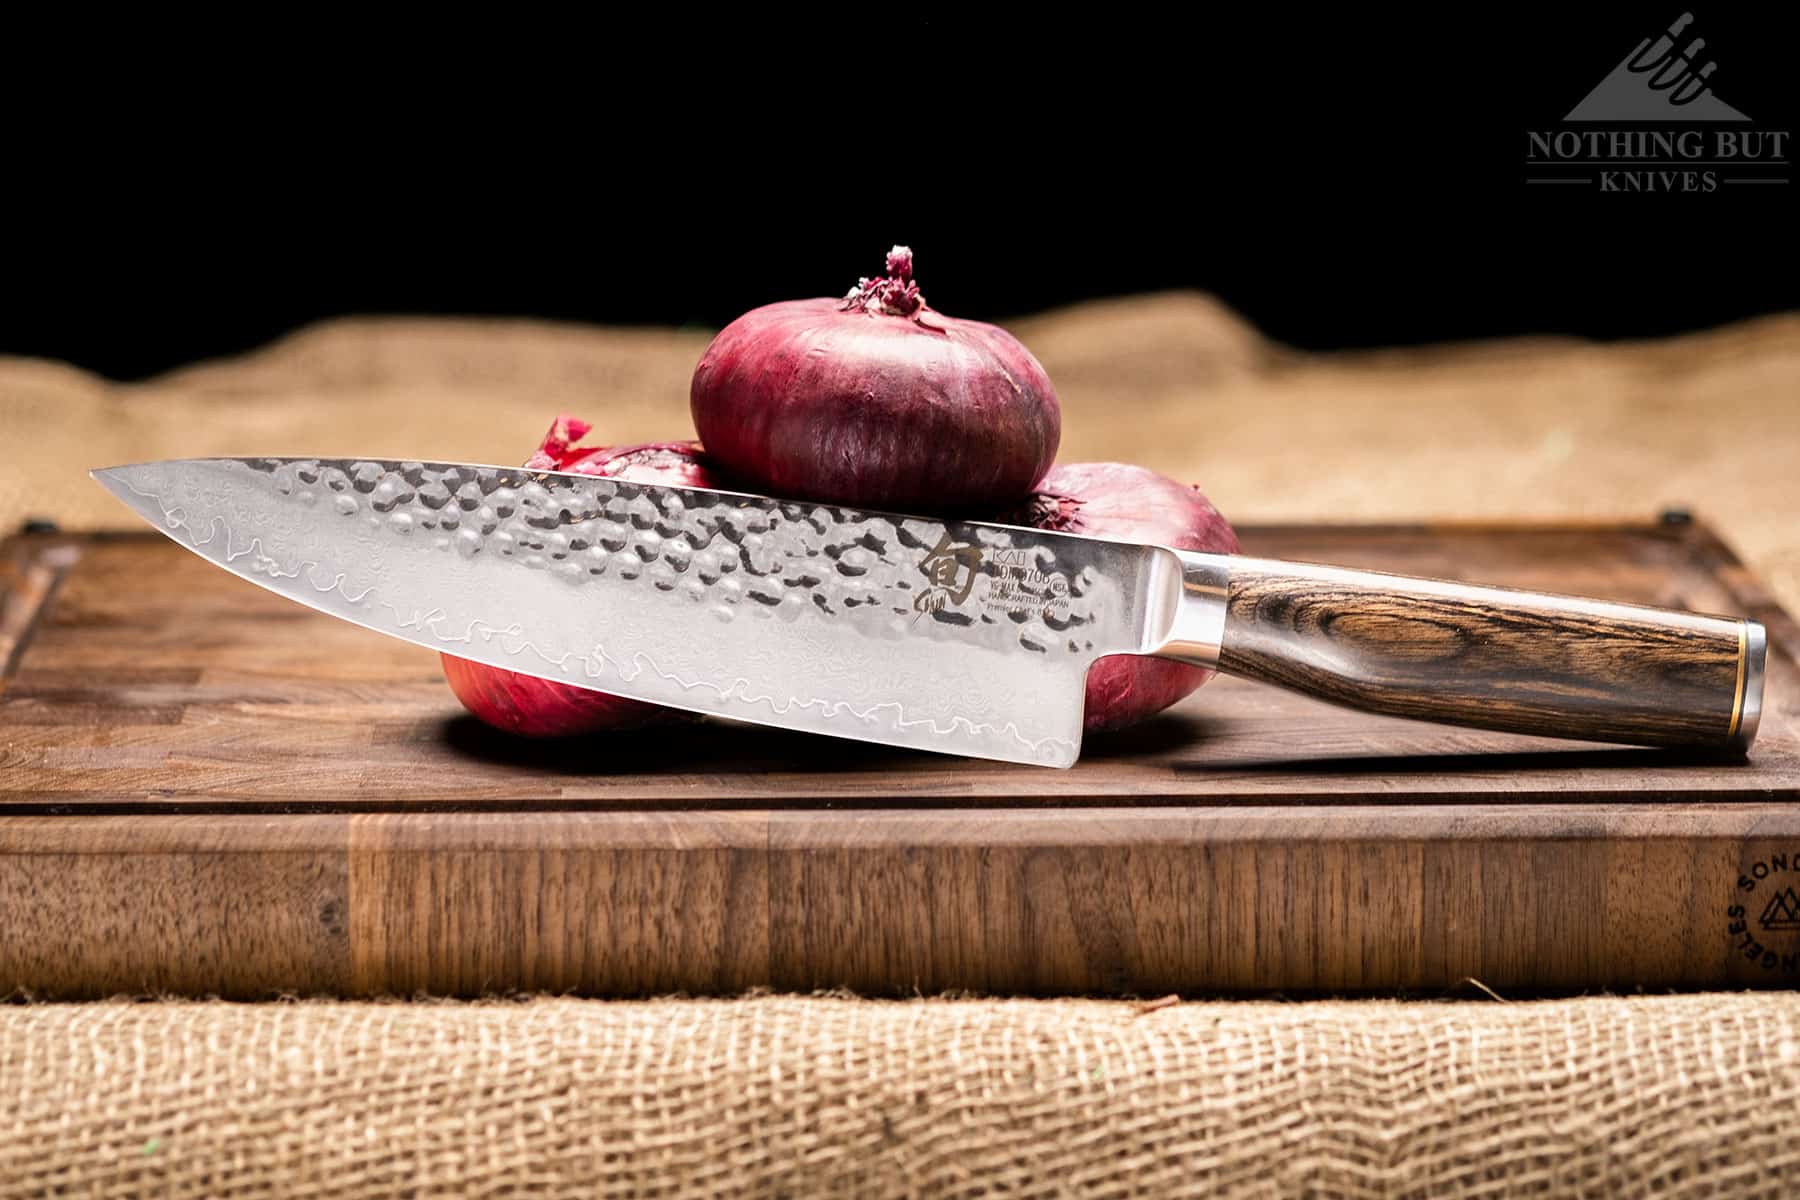 Shun Knife Comparison: Which Blade Cuts It Best?